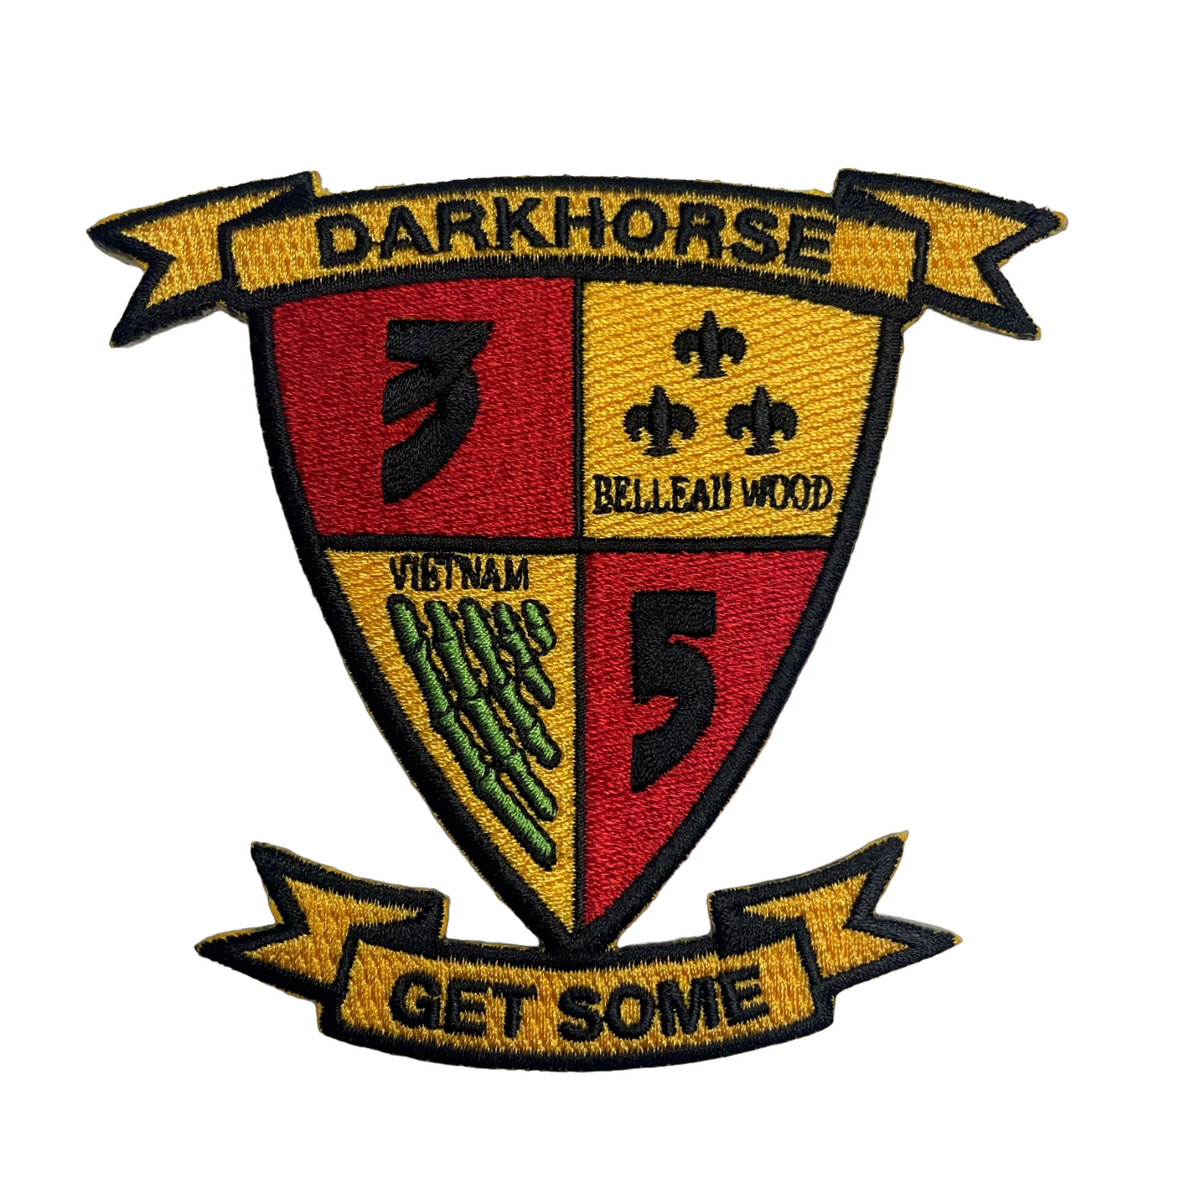 3rd Battalion 5th Marines "Darkhorse, Get Some" - Officially Licensed USMC Patch